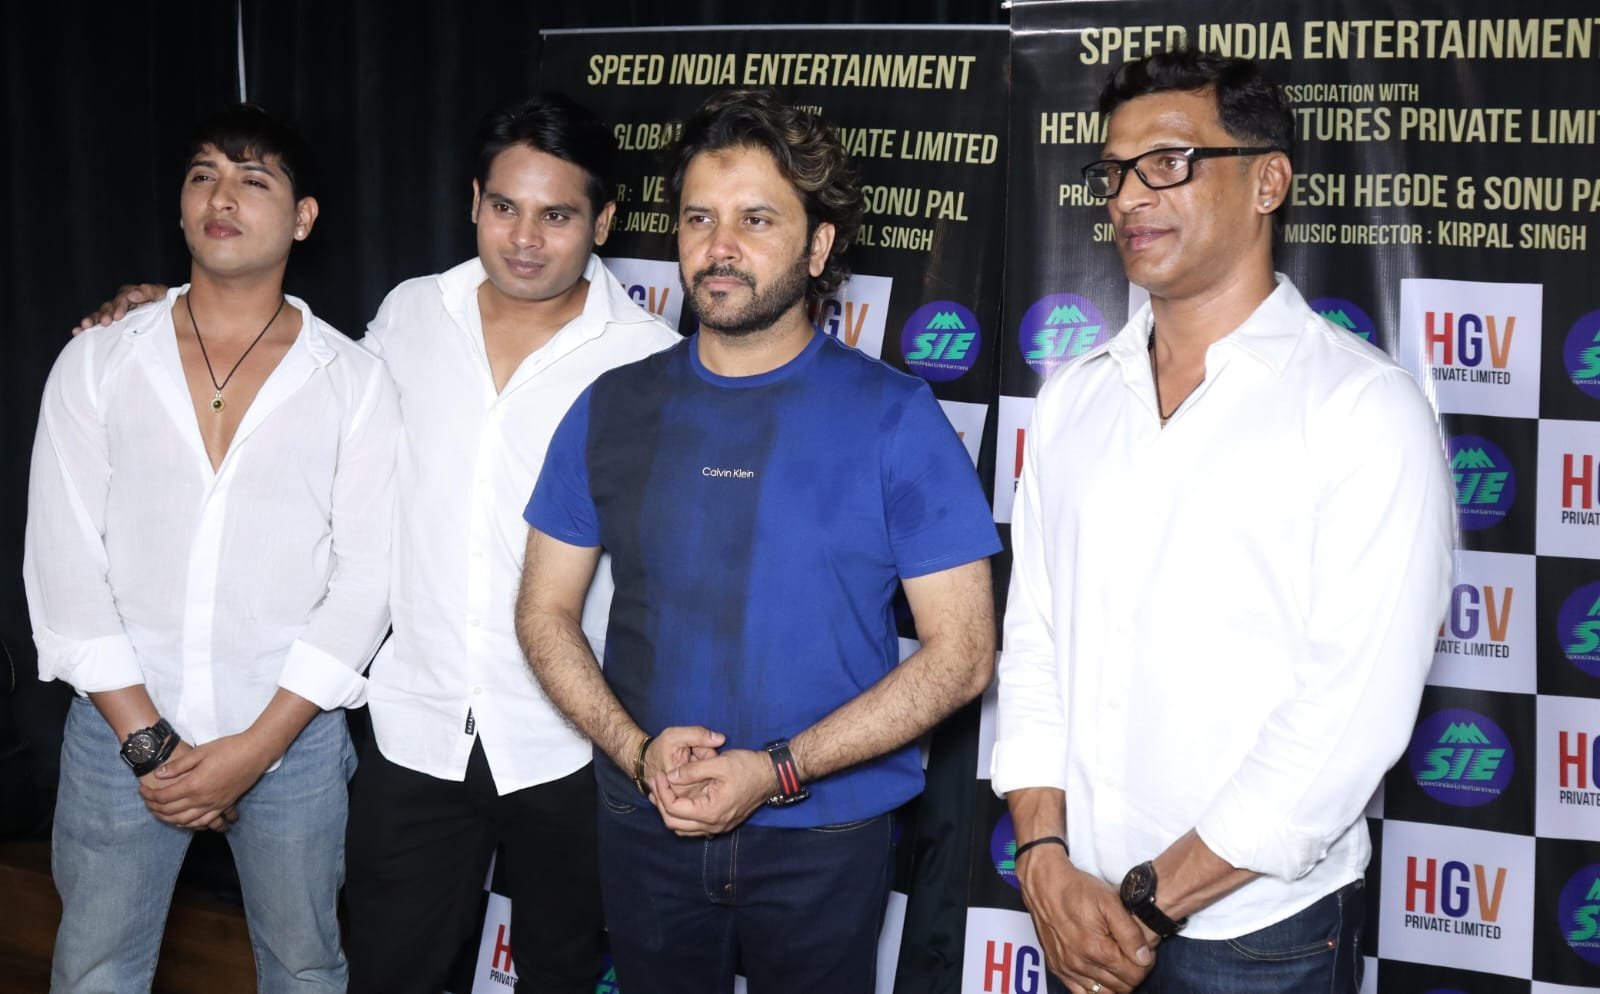 Singer Javed Ali recorded the song for Speed India Entertainment & hgv